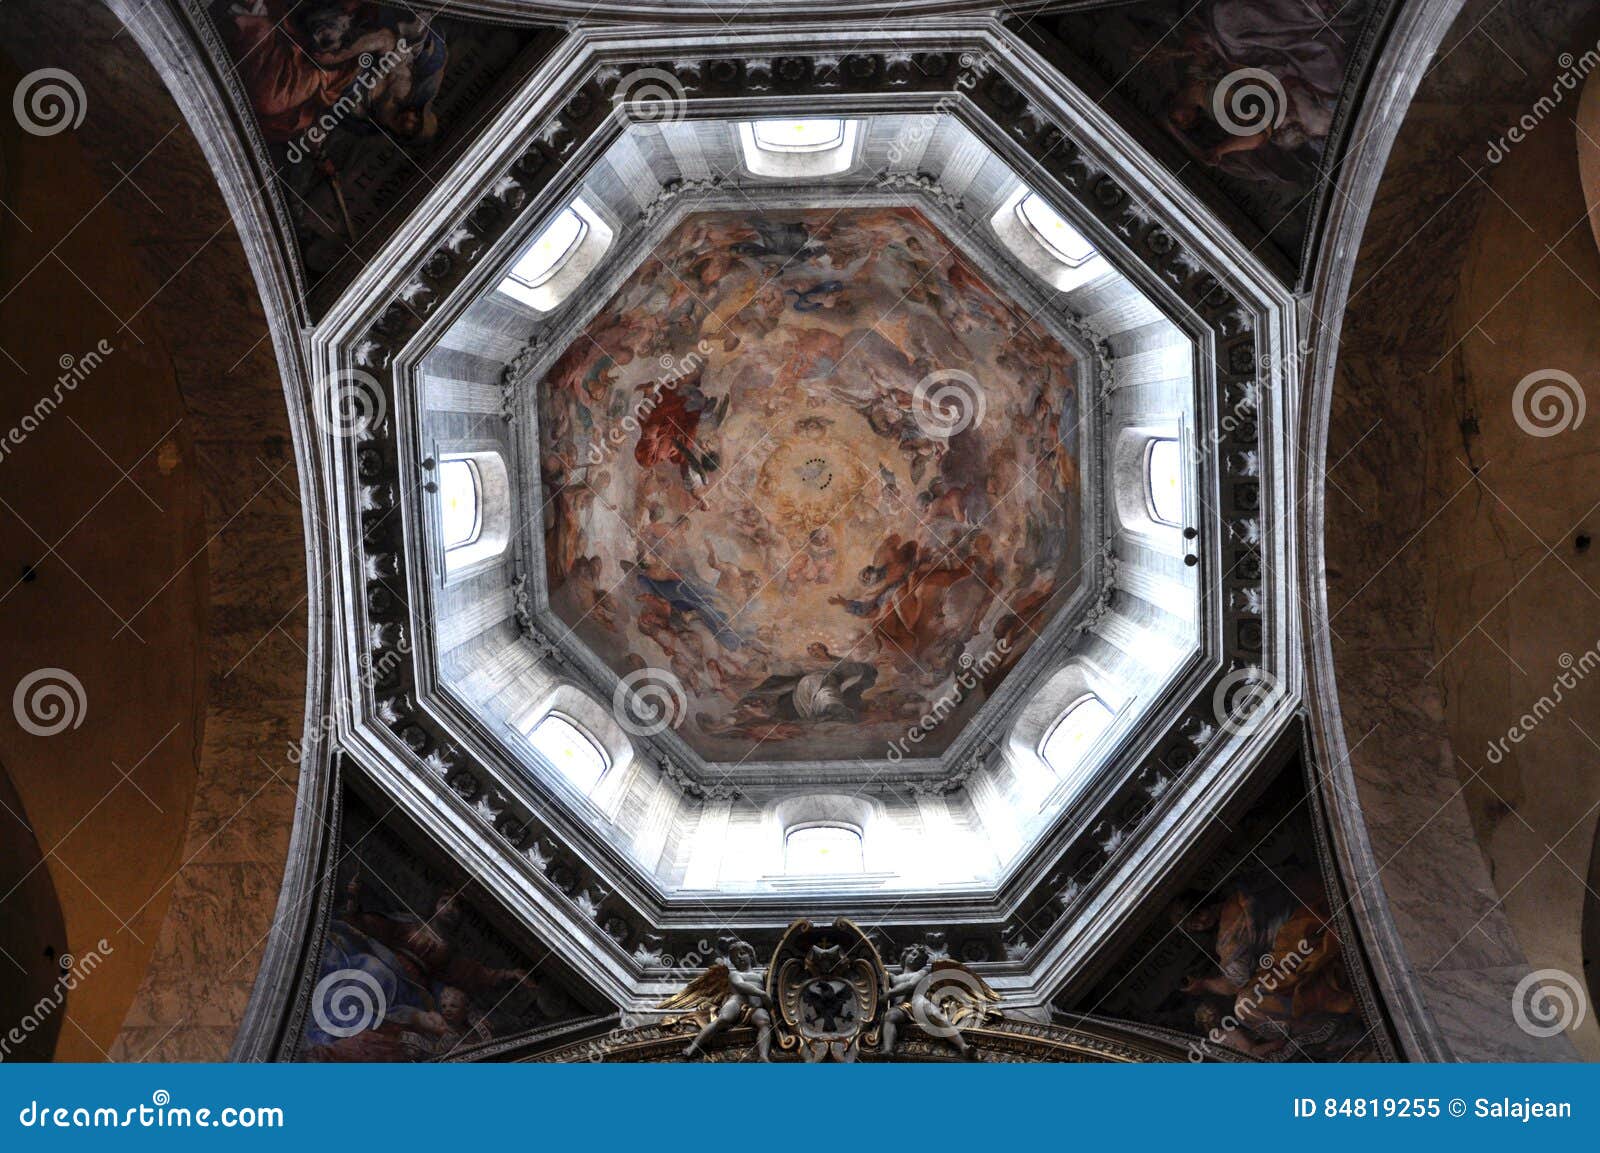 Painted Ceiling Of The Dome Of Santa Maria Del Popolo Basilica